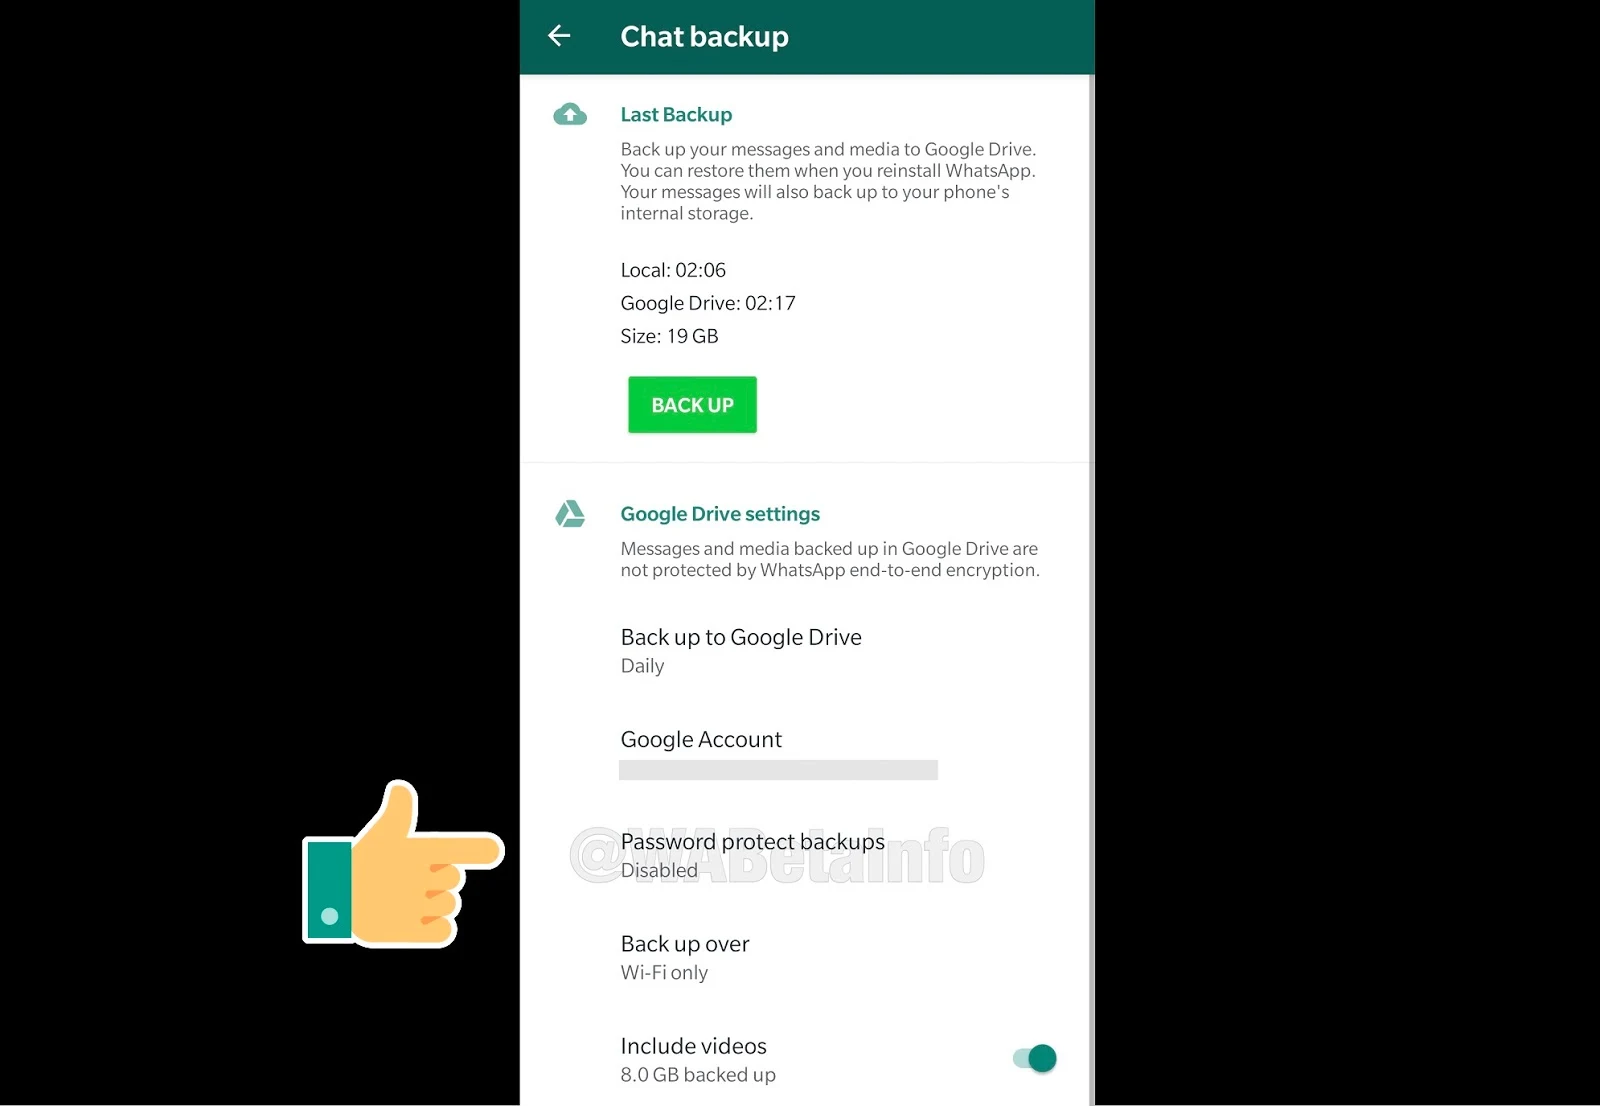 Good news! Soon Whatsapp users will be able to protect their Google Drive backup data